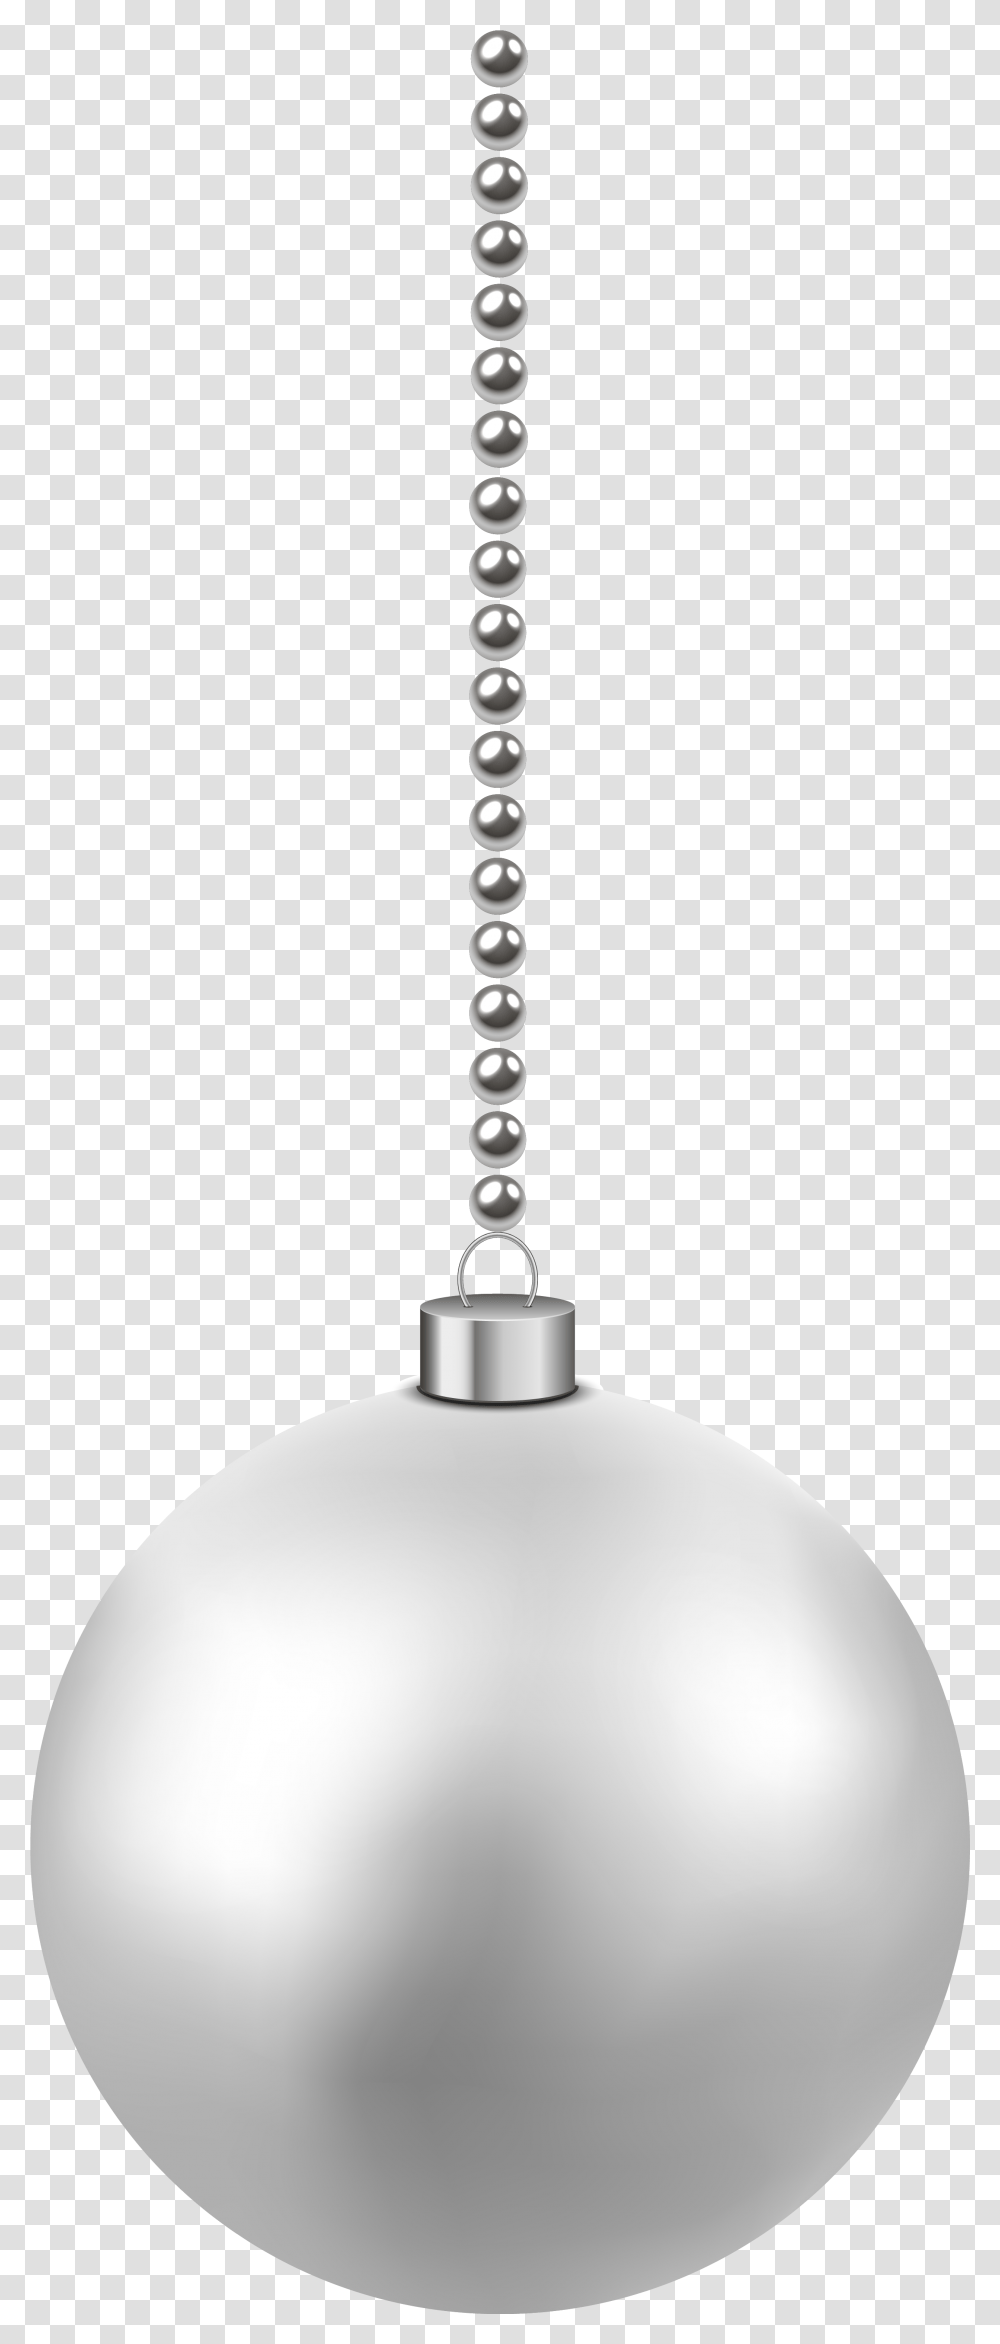 White Christmas Ball Pic Mart Lampshade, Diamond, Gemstone, Jewelry, Accessories Transparent Png